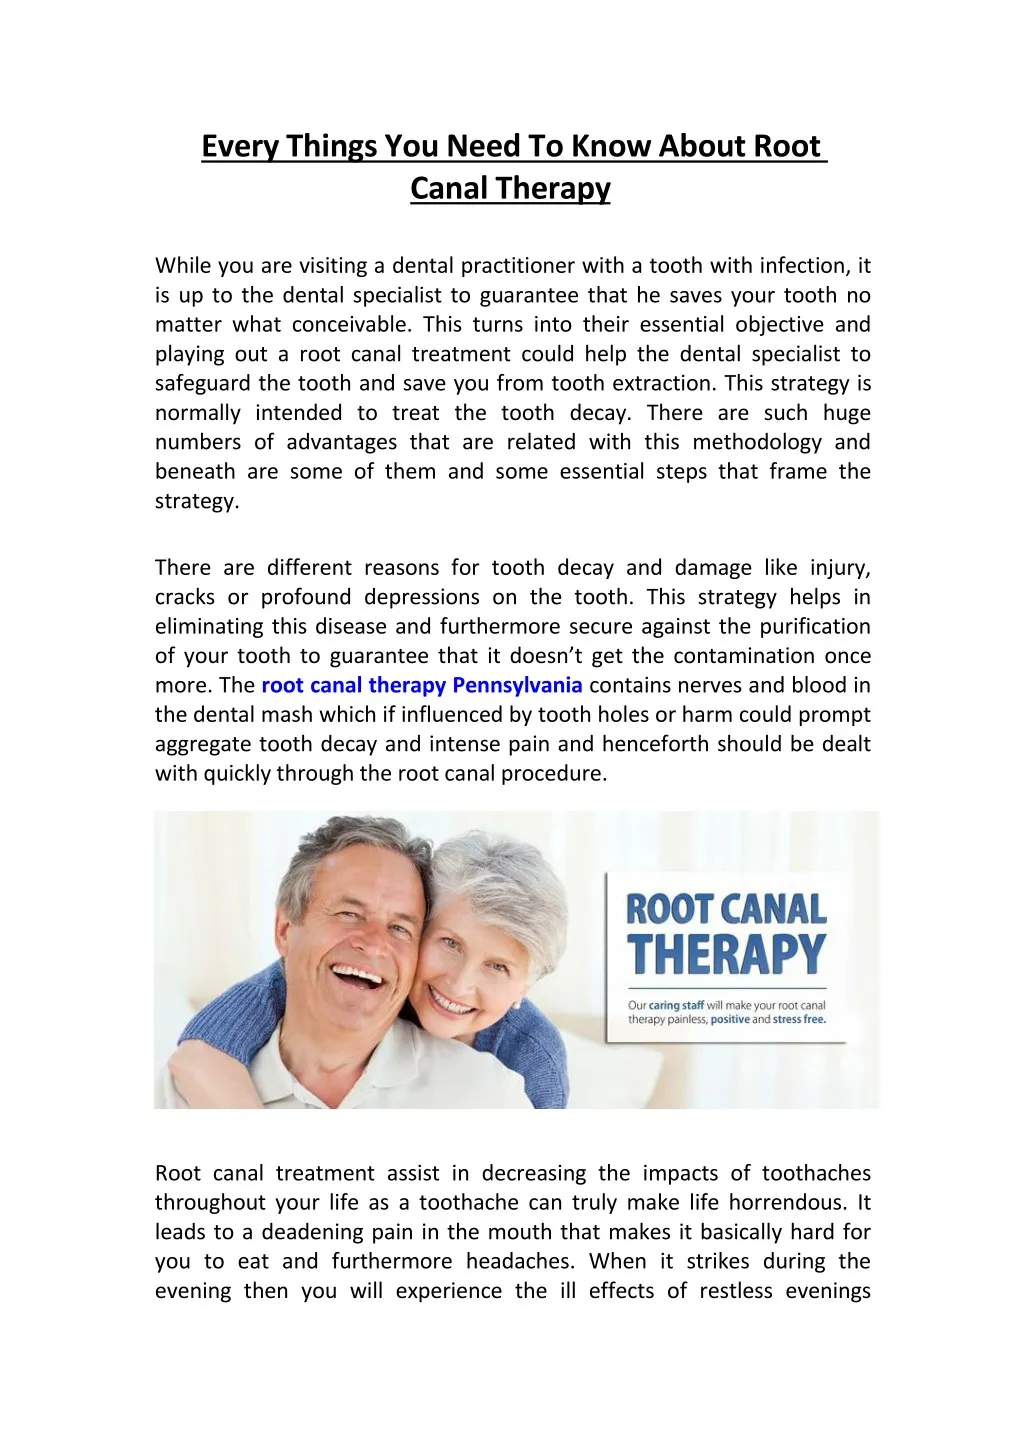 everythingsyouneed to knowabout root canal therapy